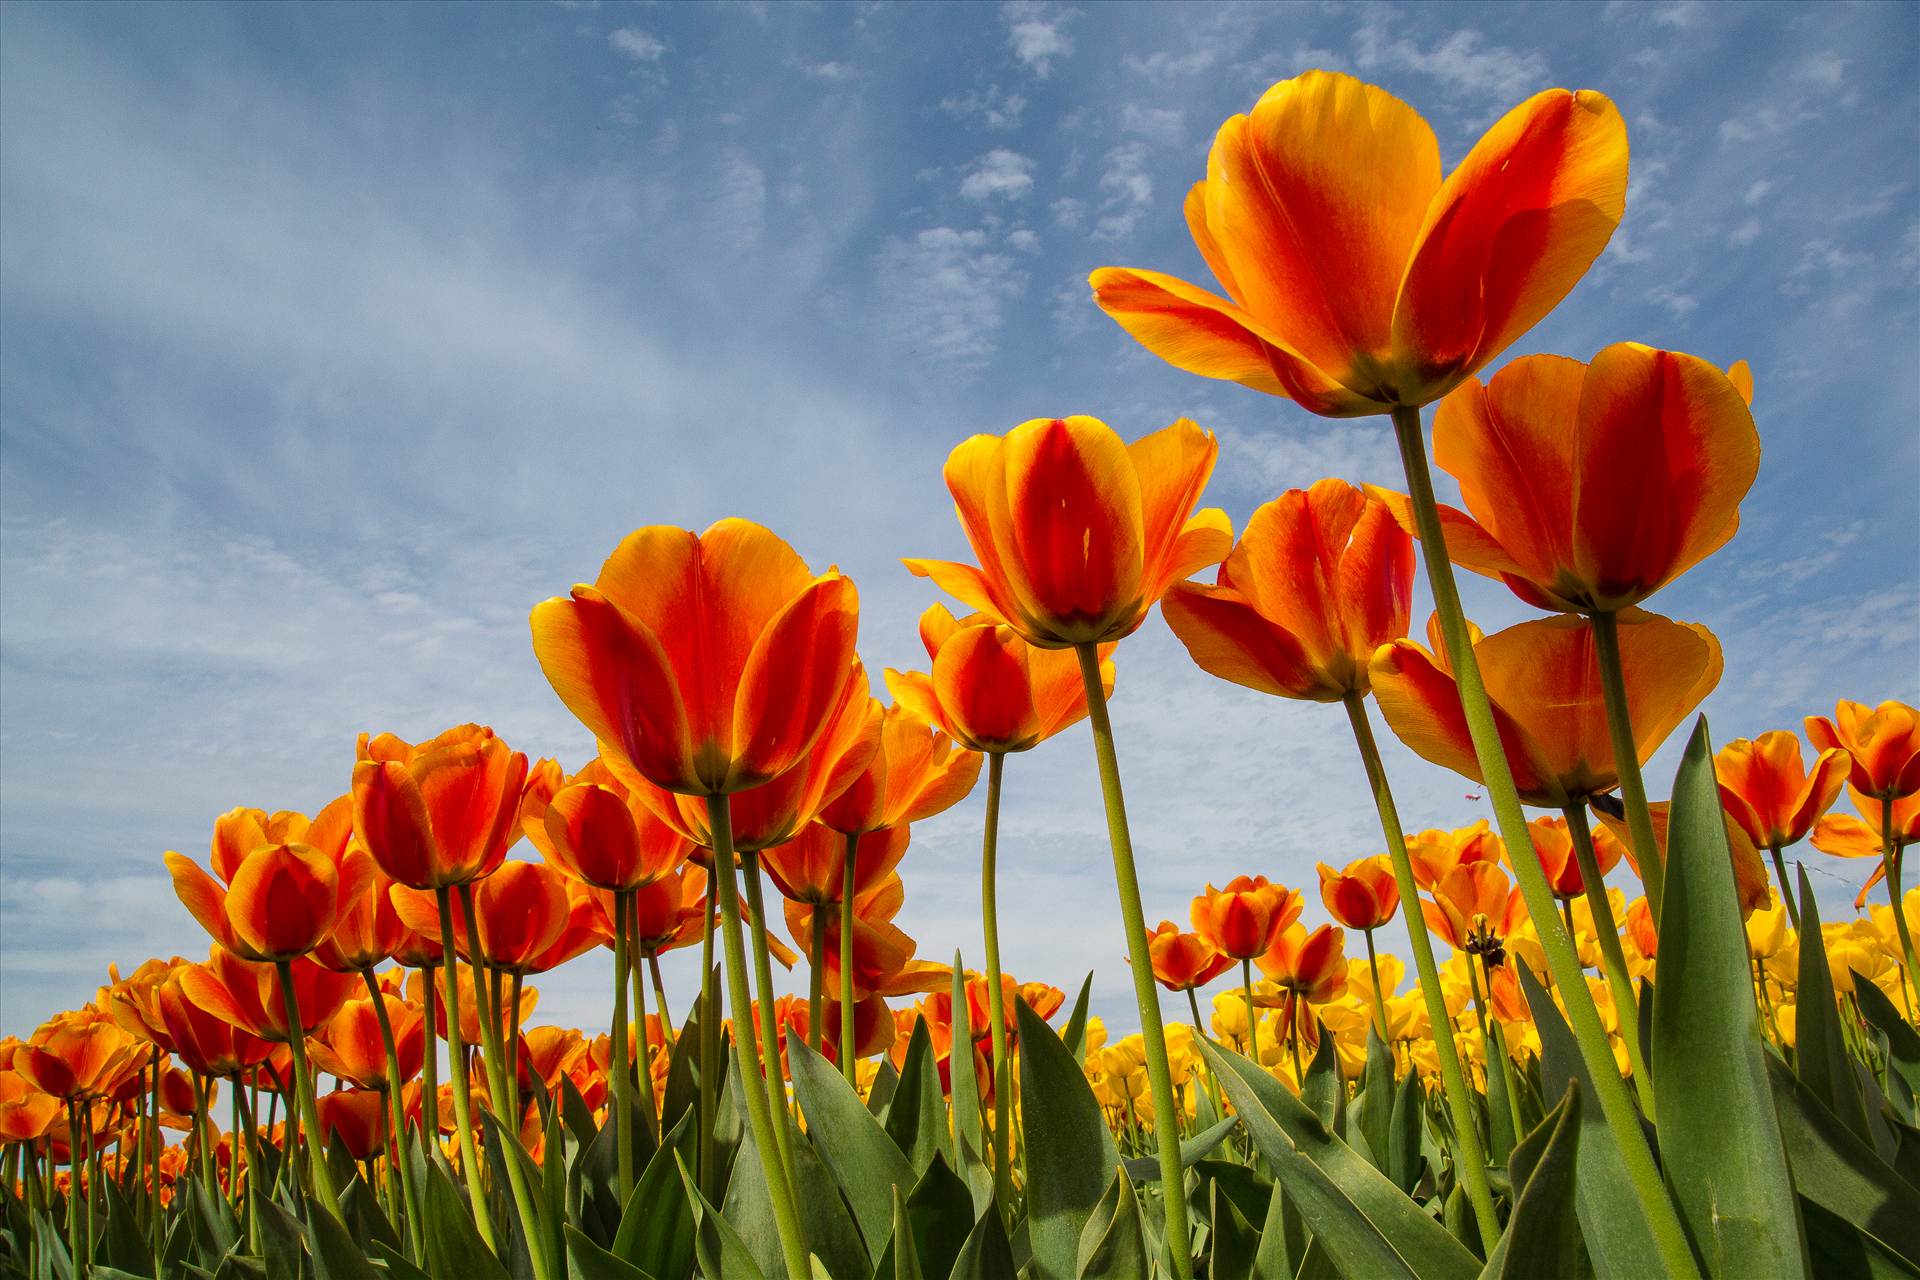 Tulip Festival From the Skagit County Tulip Festival in Washington state. by Scott Smith Photos